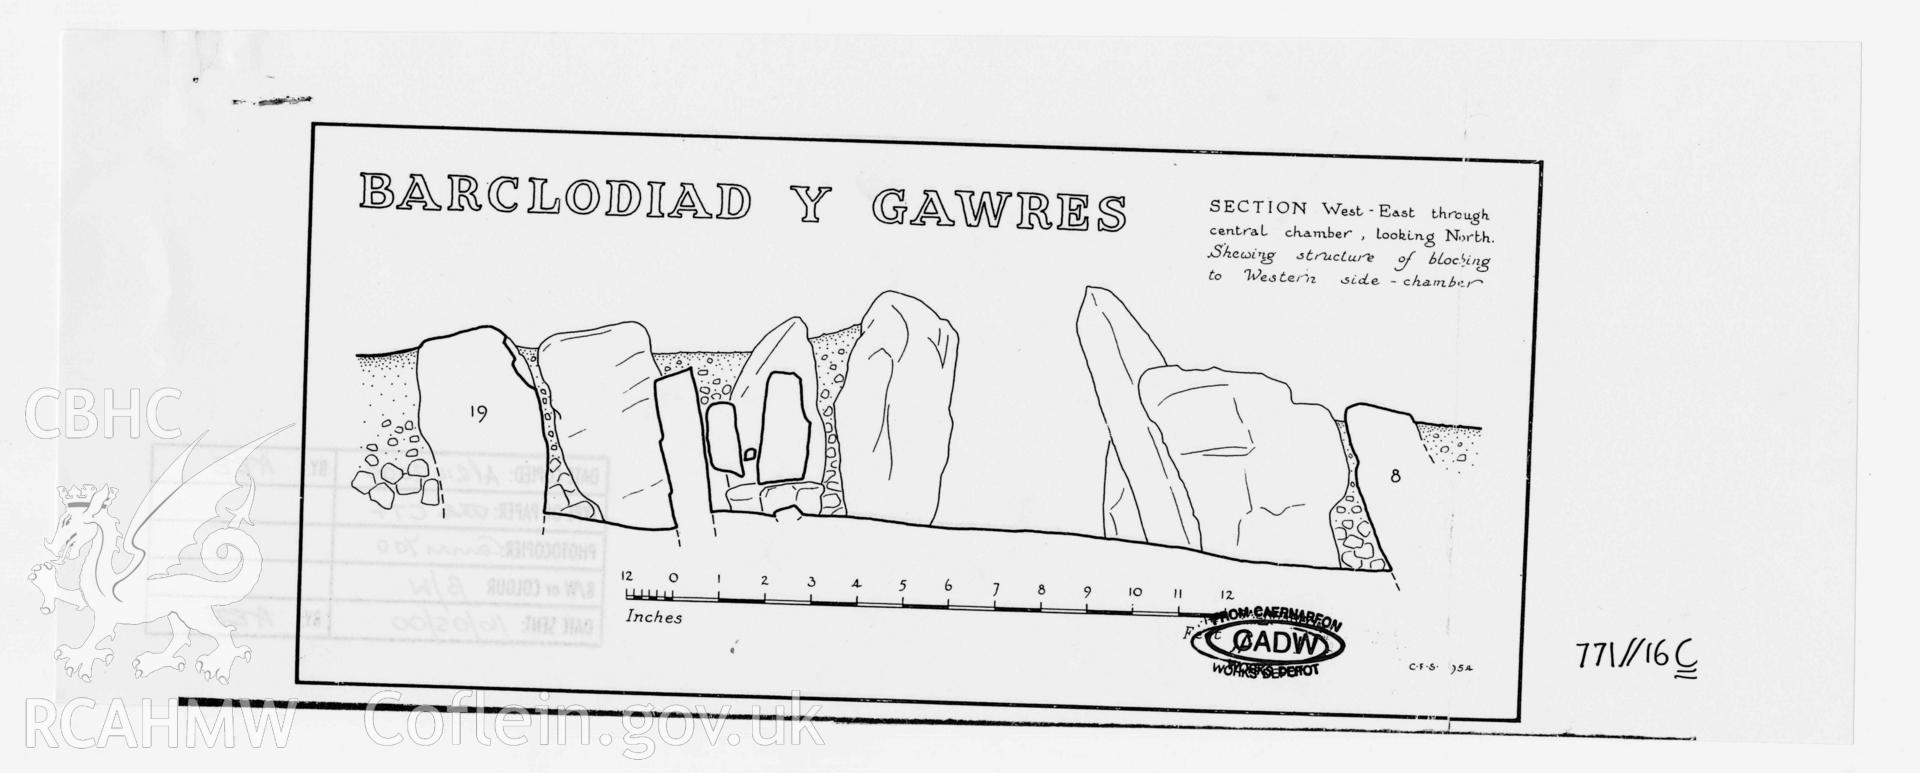 Cadw guardianship monument drawing of Barclodiad y Gawres Round Barrow. Sect, W-E thro' chamber. Cadw Ref No: 771//16C. Scale 1:40.